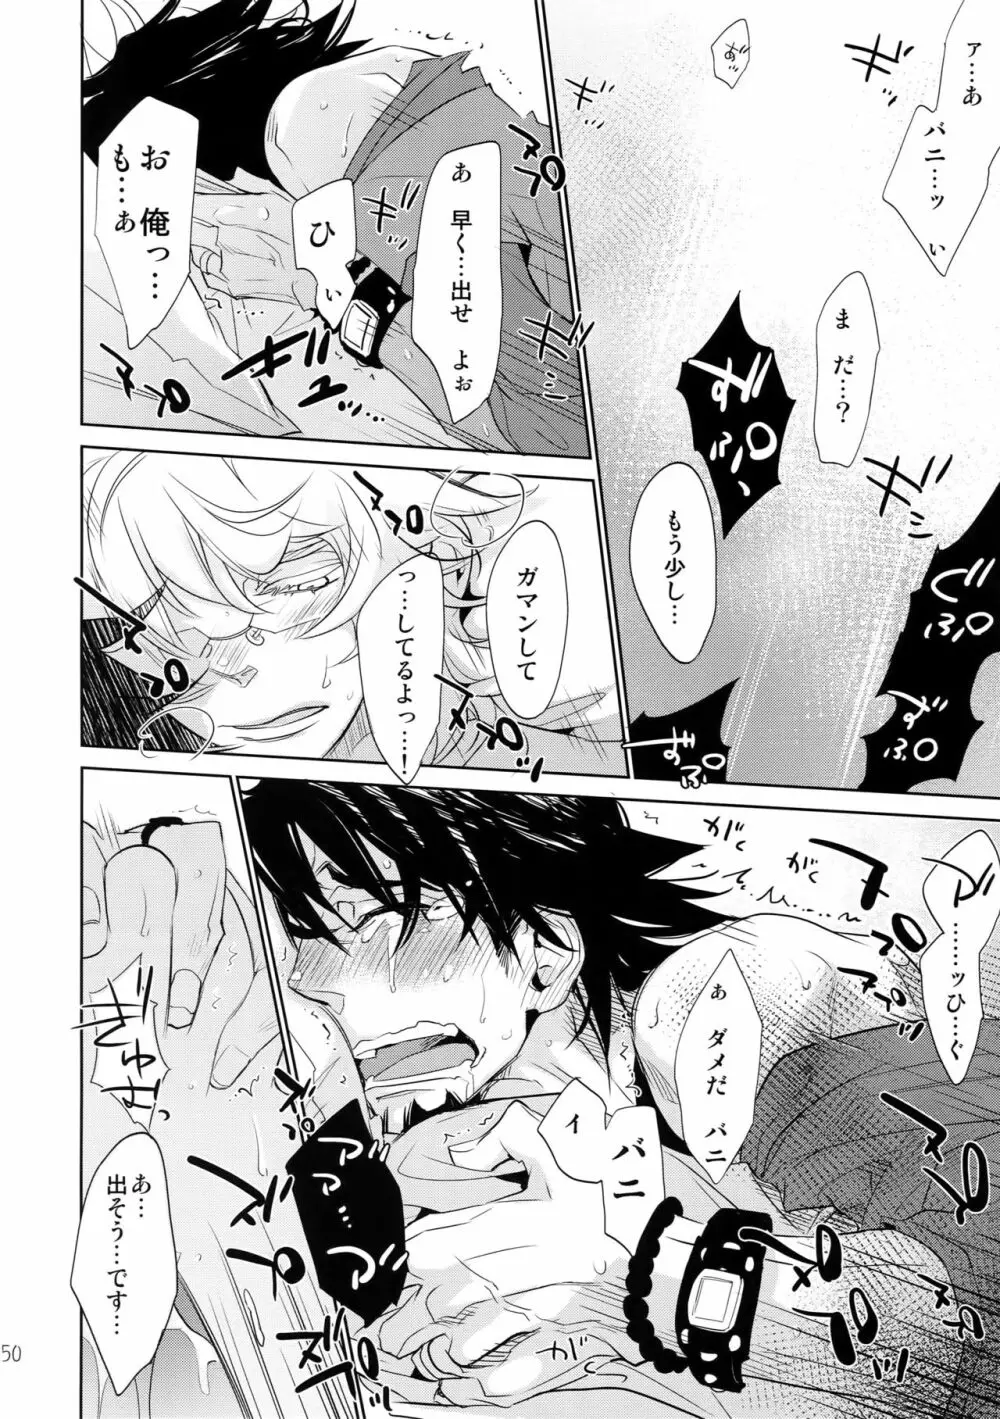 T&B再録!2 - page49